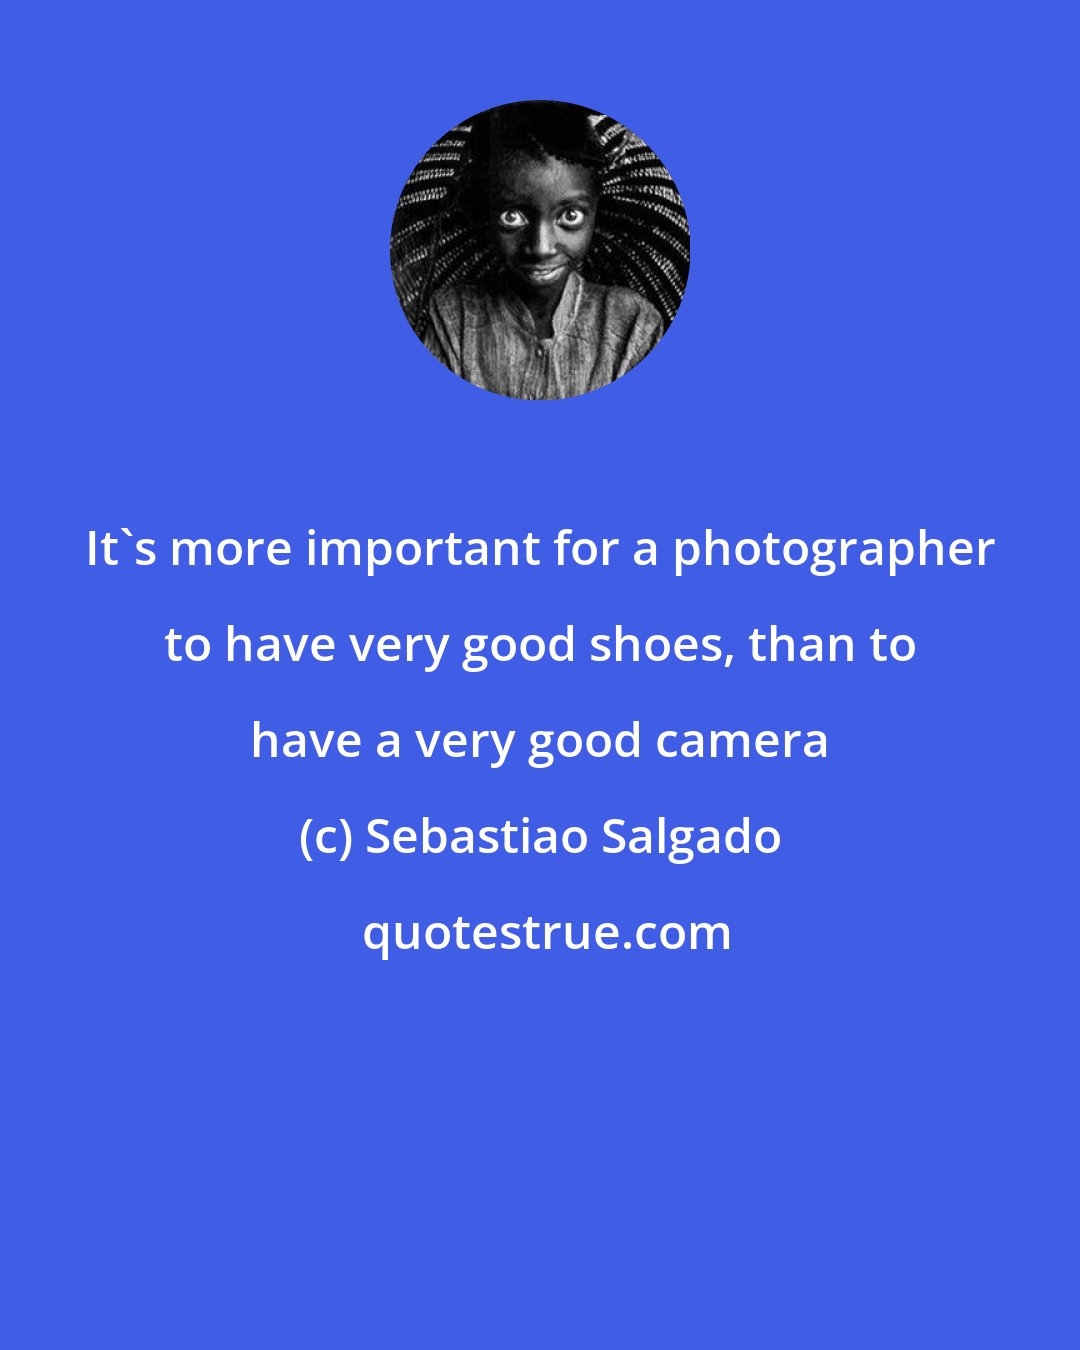 Sebastiao Salgado: It's more important for a photographer to have very good shoes, than to have a very good camera